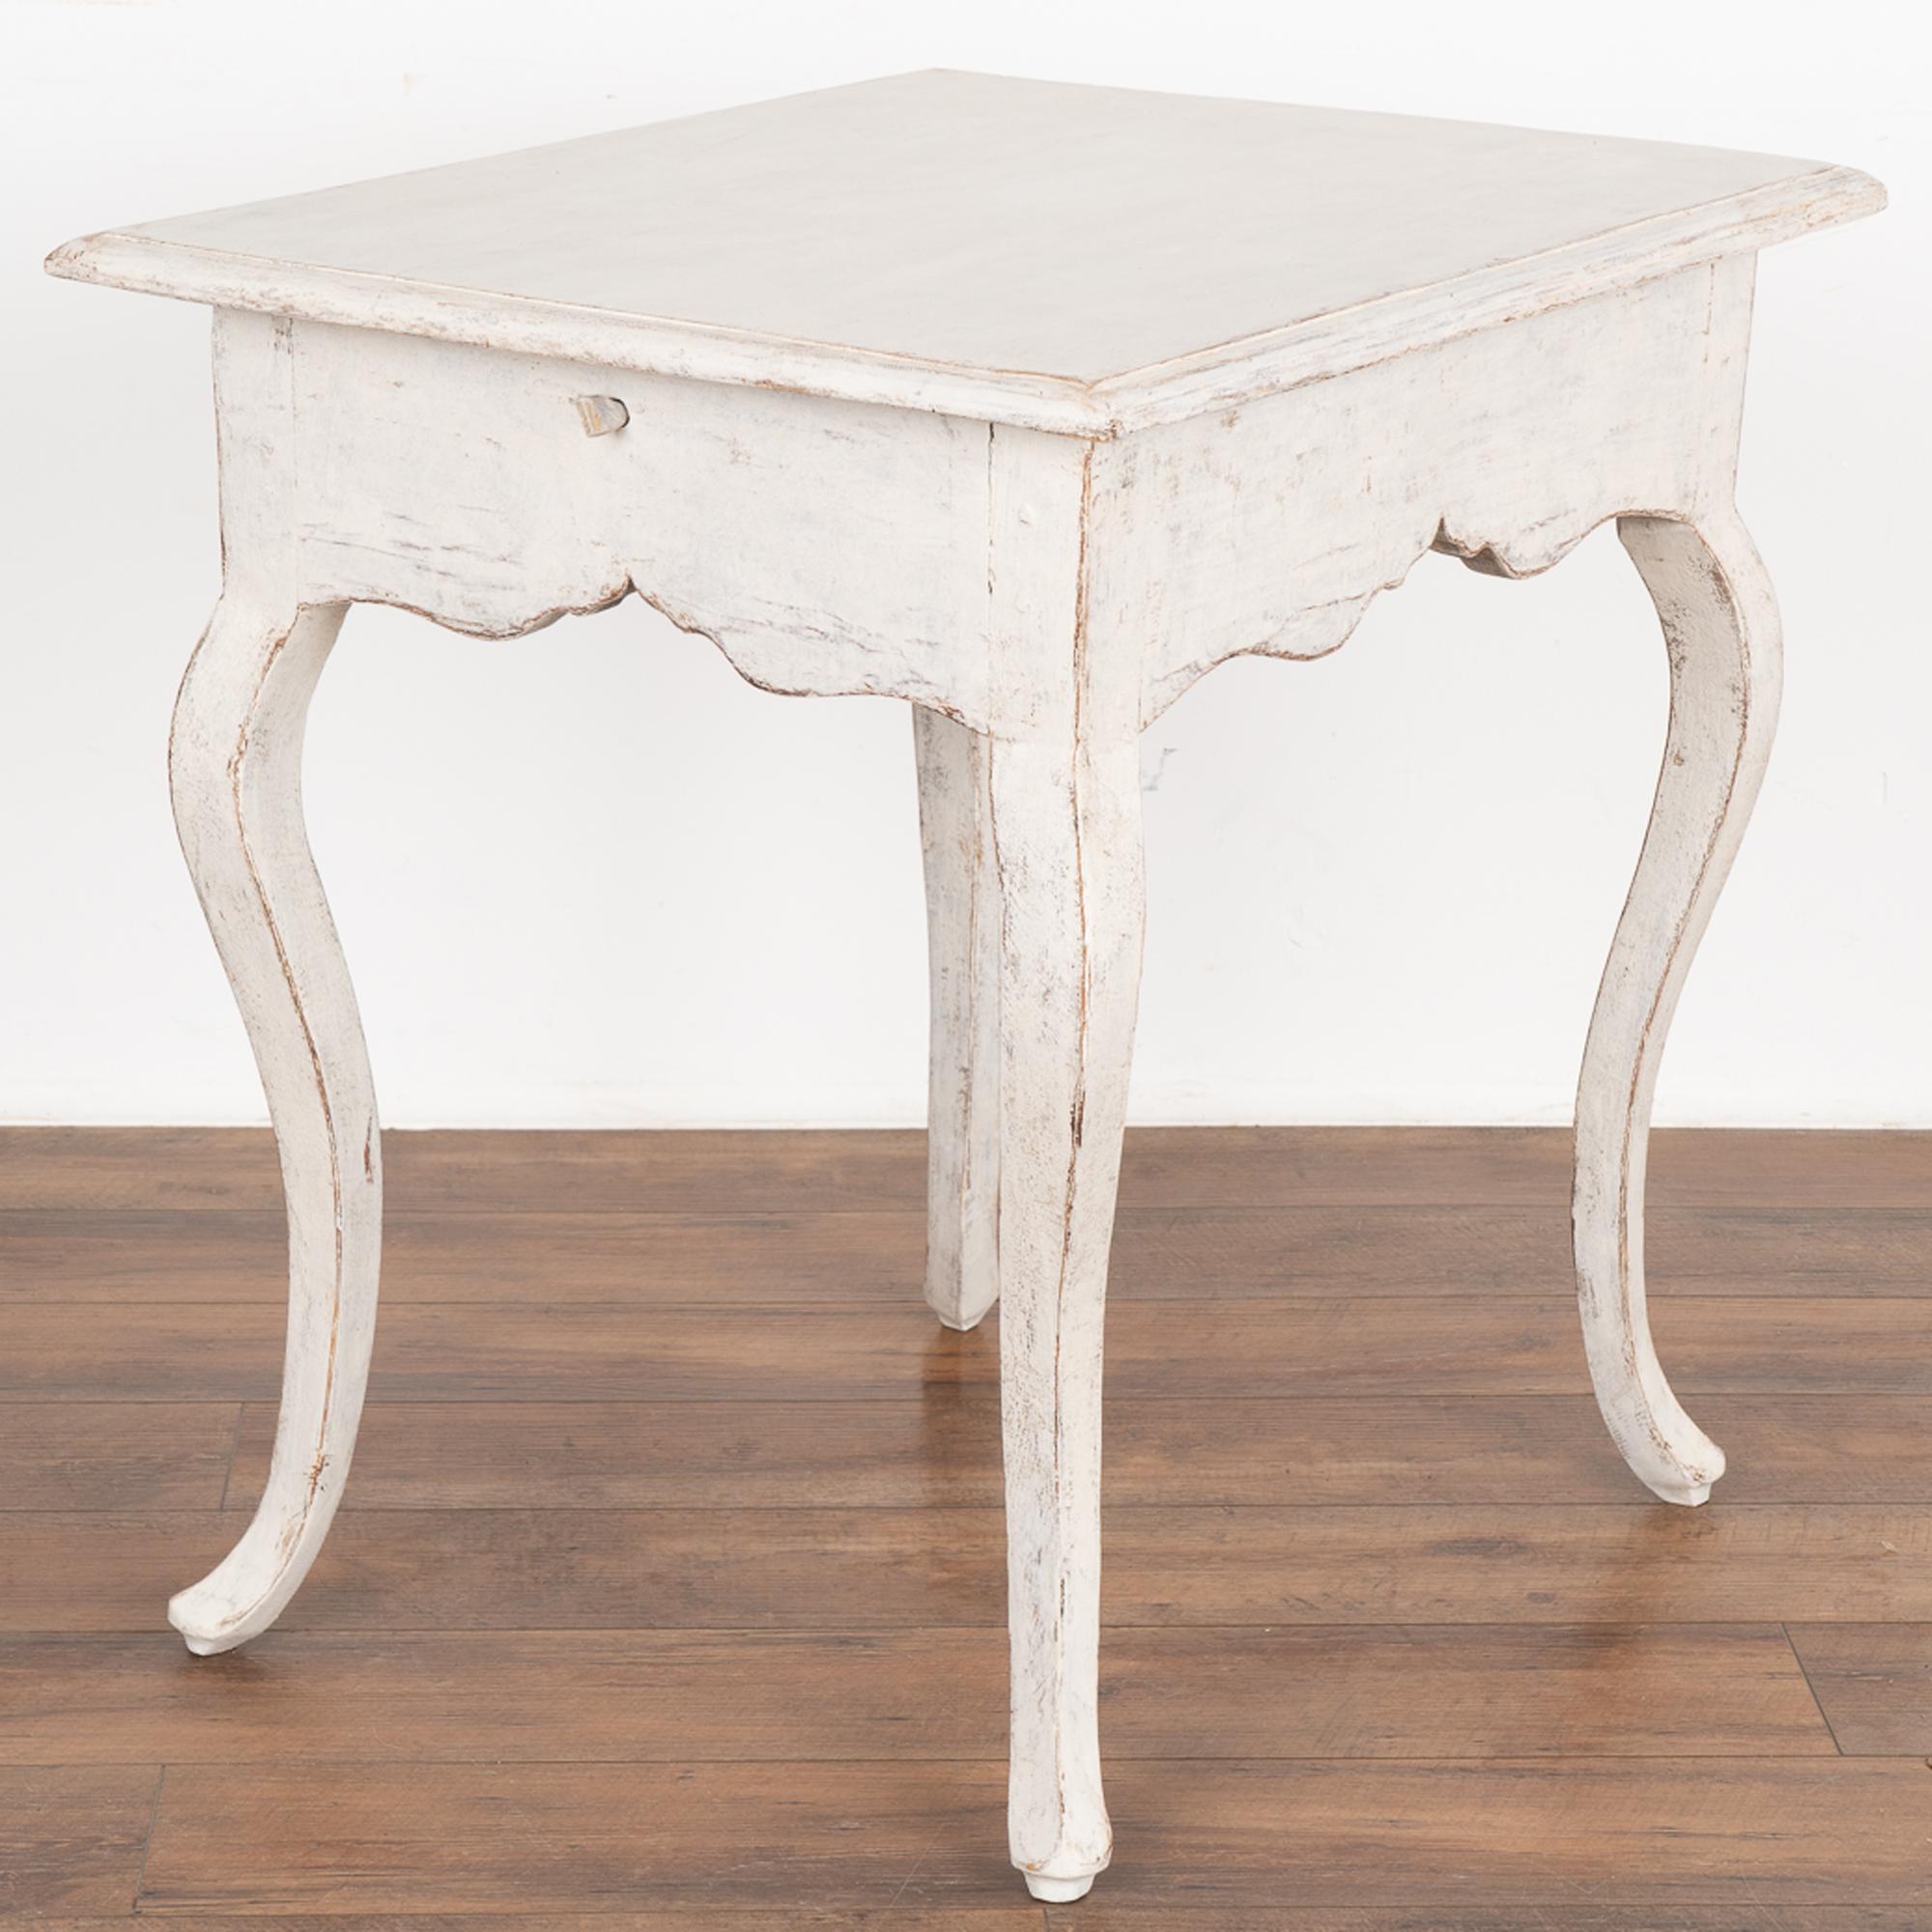 White Gustavian Side Table with Cabriolet Legs, Sweden circa 1800-20 For Sale 5